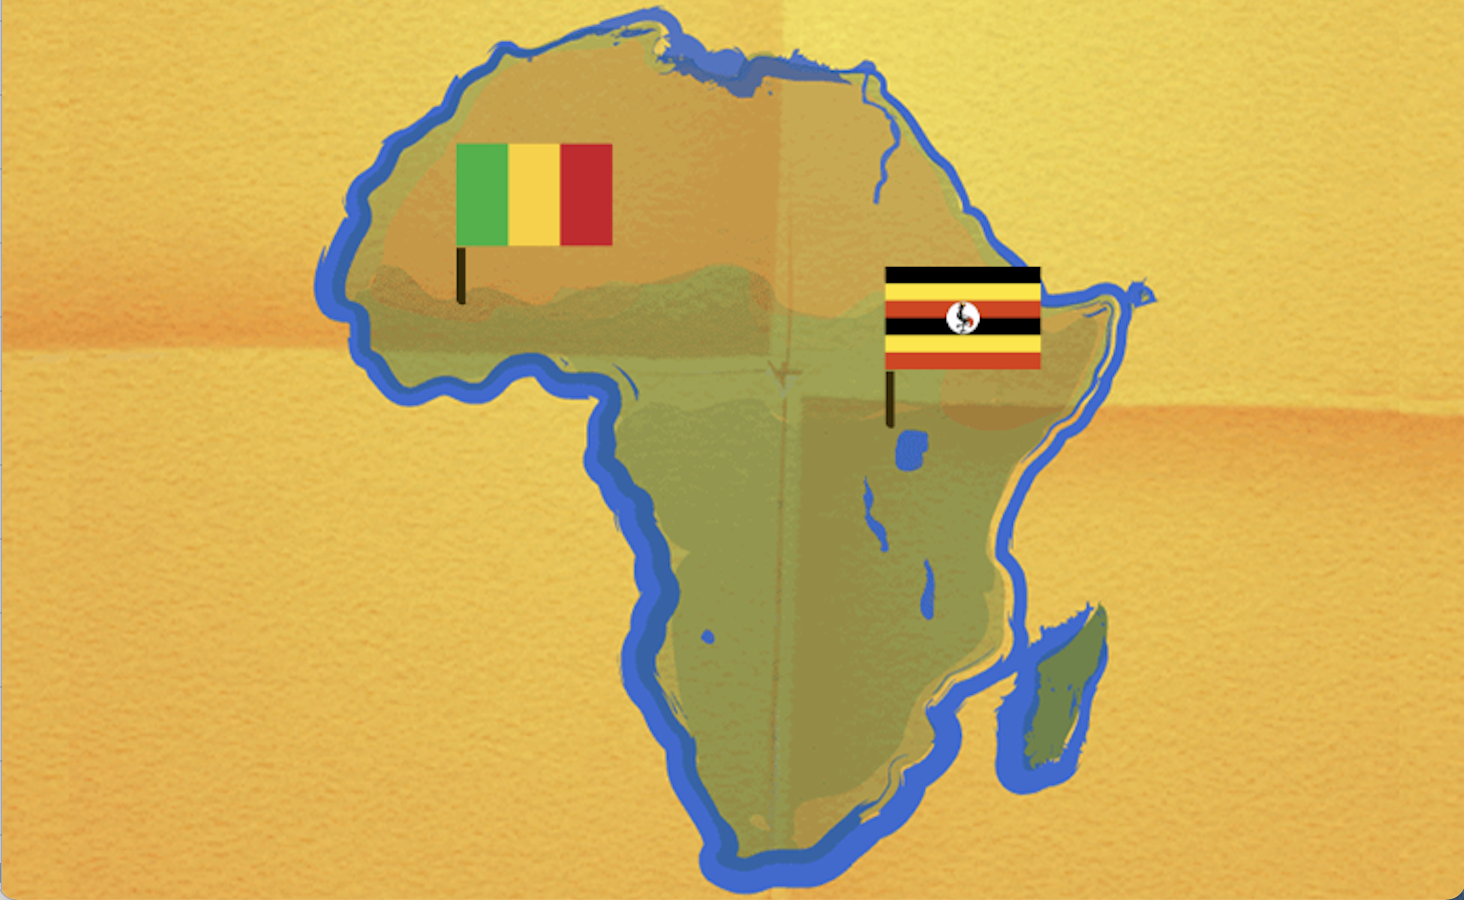 Map of Africa; Mali and Uganda are highlighted where their respective flags point. Image credit: © 2010 Roland Urbanek. Flags are edited in and overlayed on the image.